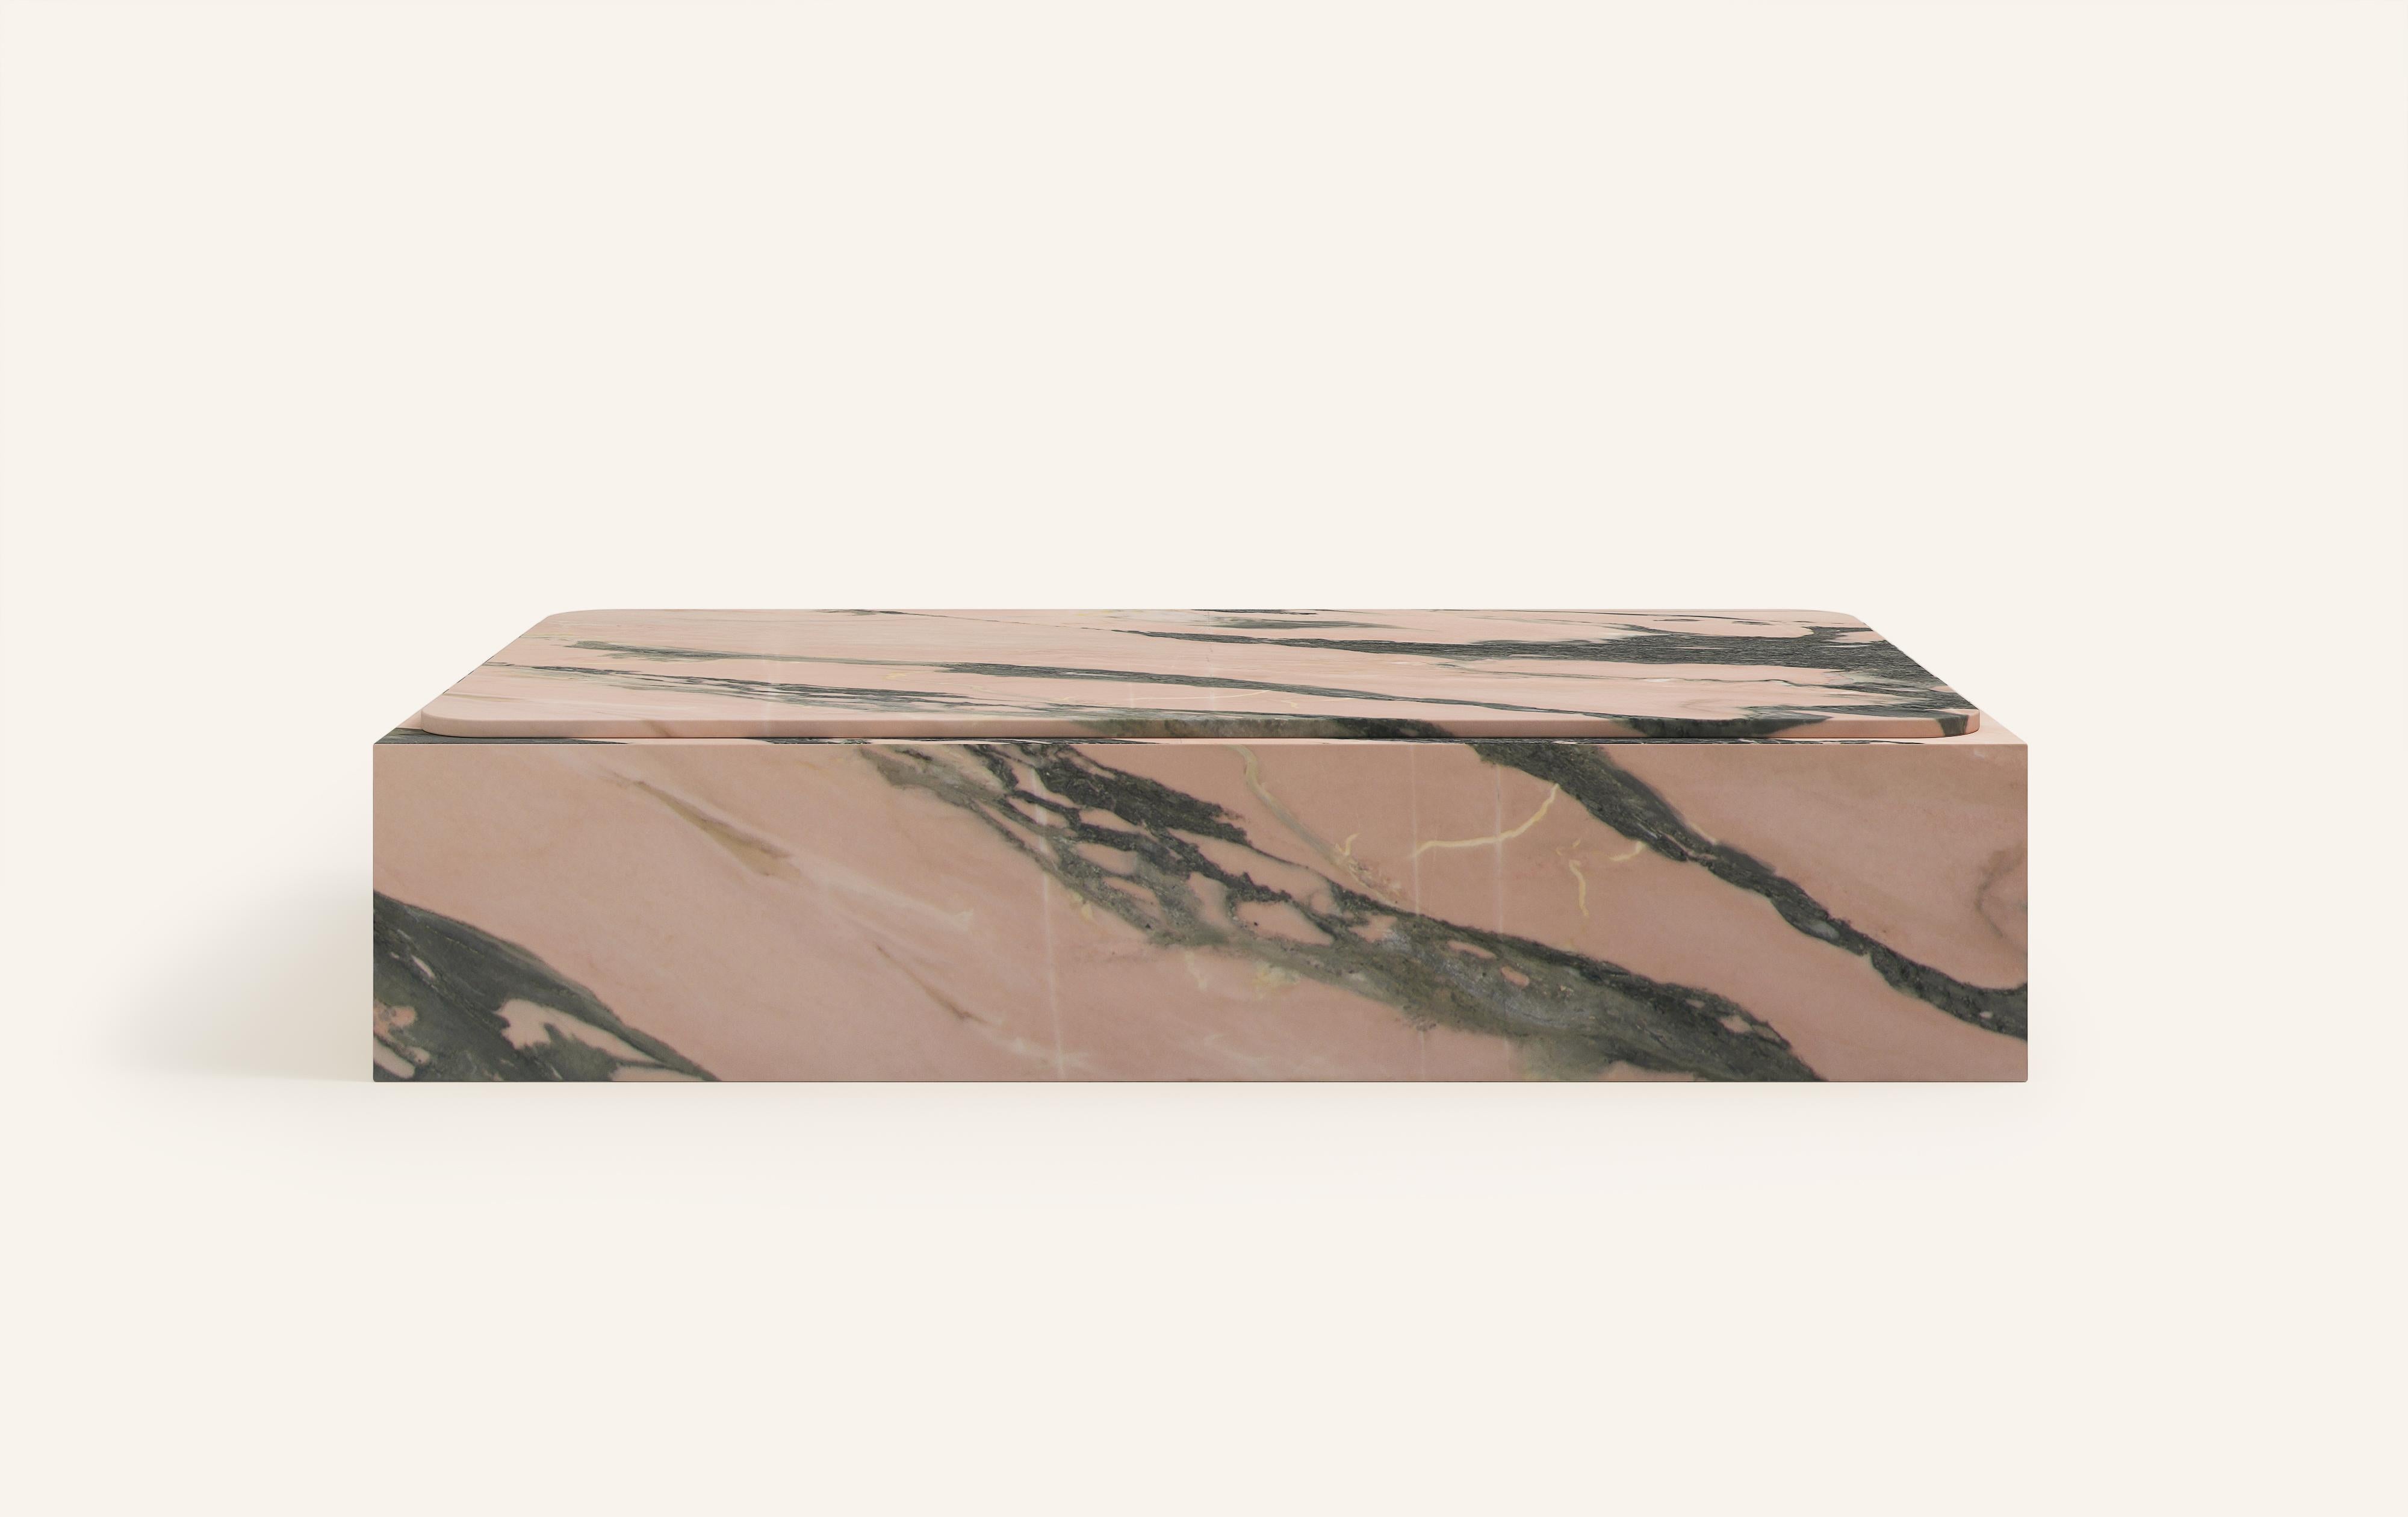 MONOLITHIC FORMS SOFTENED BY GENTLE EDGES. WITH ITS BOLD MARBLE PATTERNS CUBO IS AS VERSATILE AS IT IS STRIKING.

DIMENSIONS:
72”L x 42”W x 13”H: 
- 3/4